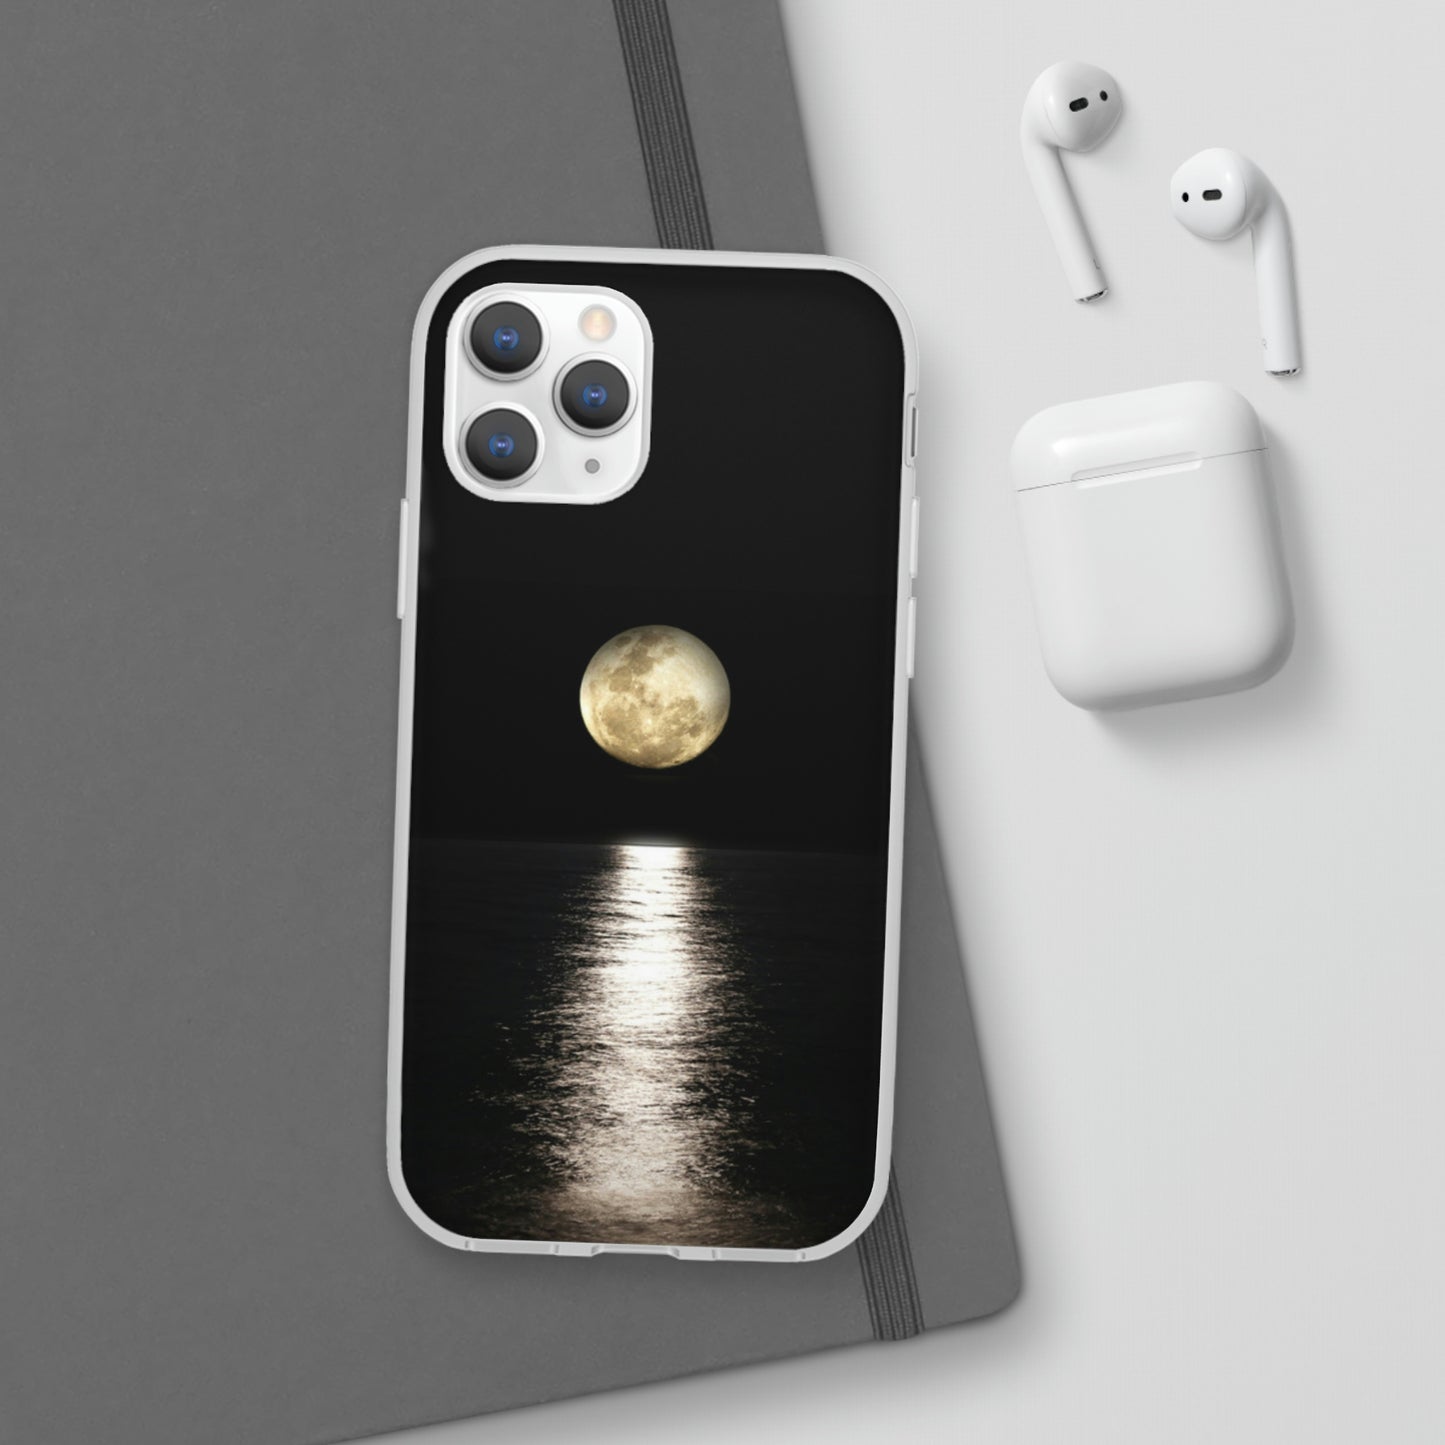 Moon reflects on water Flexi Cases Samsung Apple funny case protection slim design gift custom personalized protect iphone galazy S